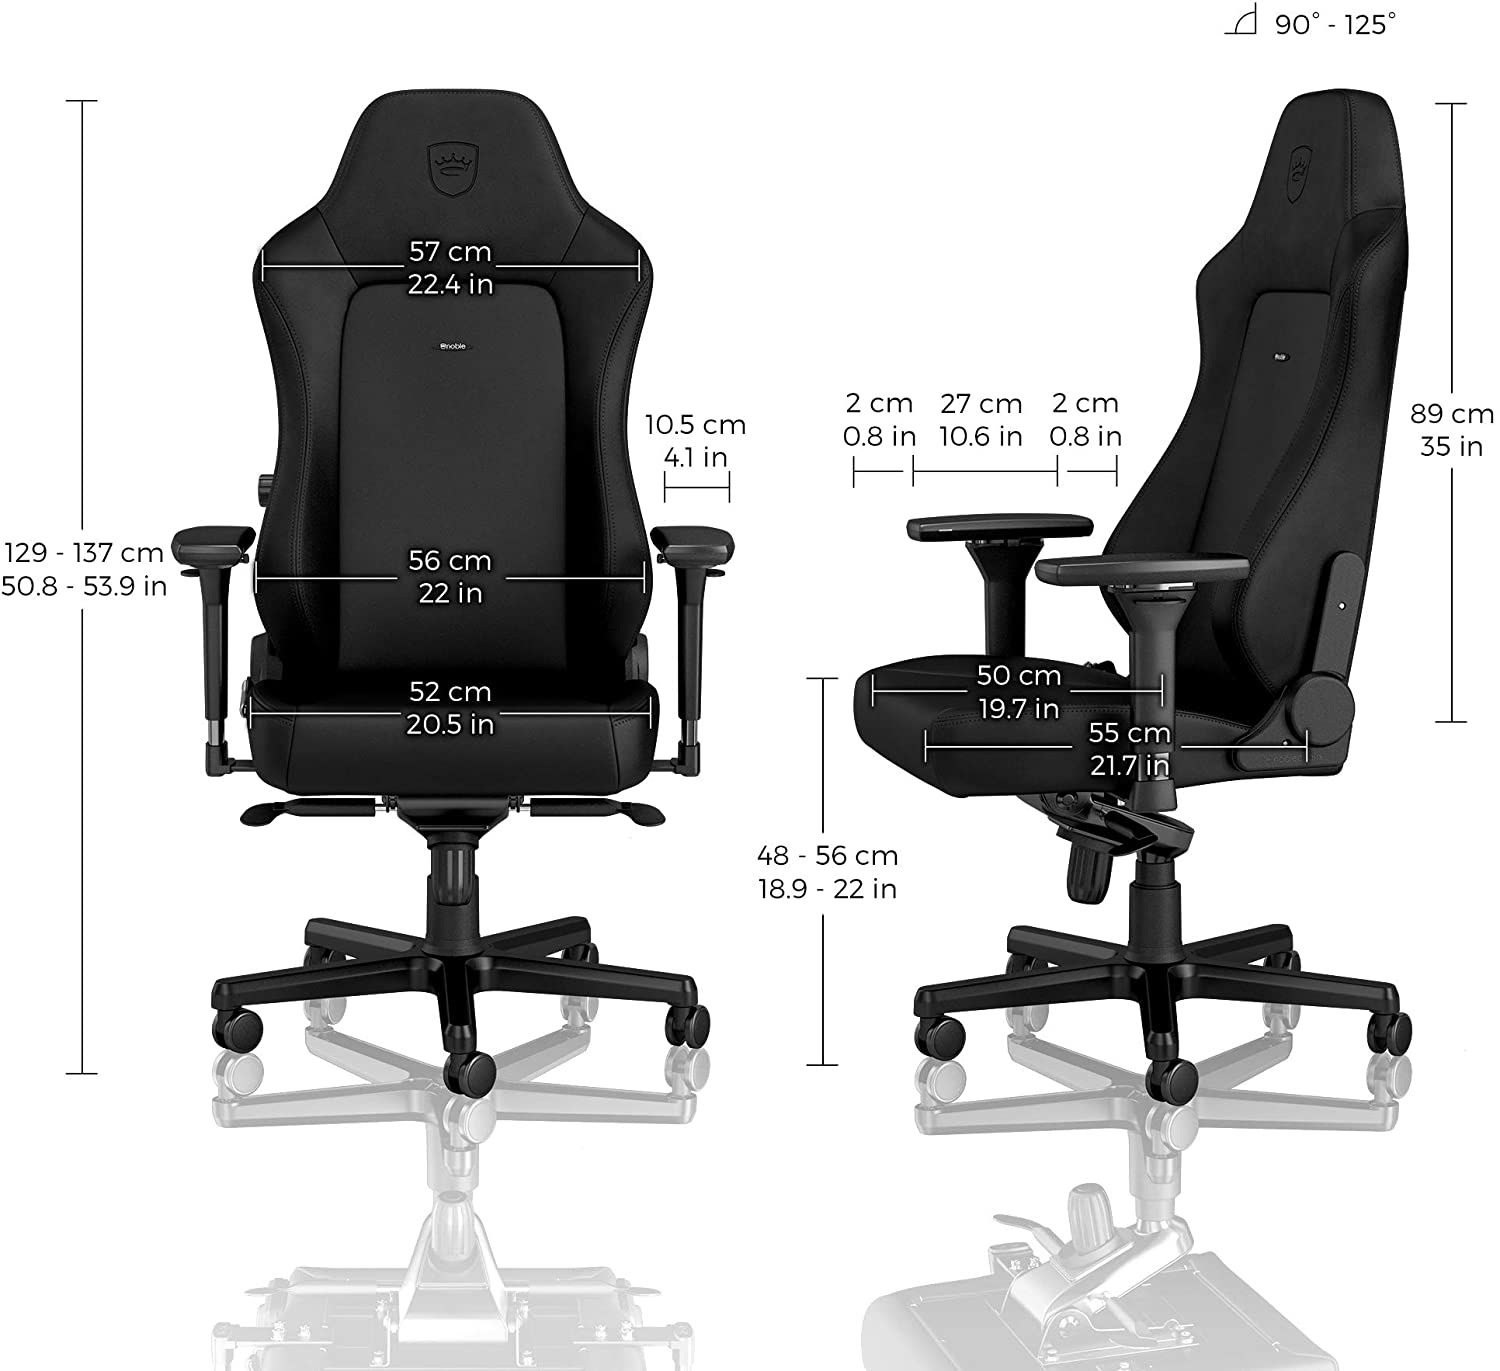 noblechairs Hero Gaming Chair dimensions